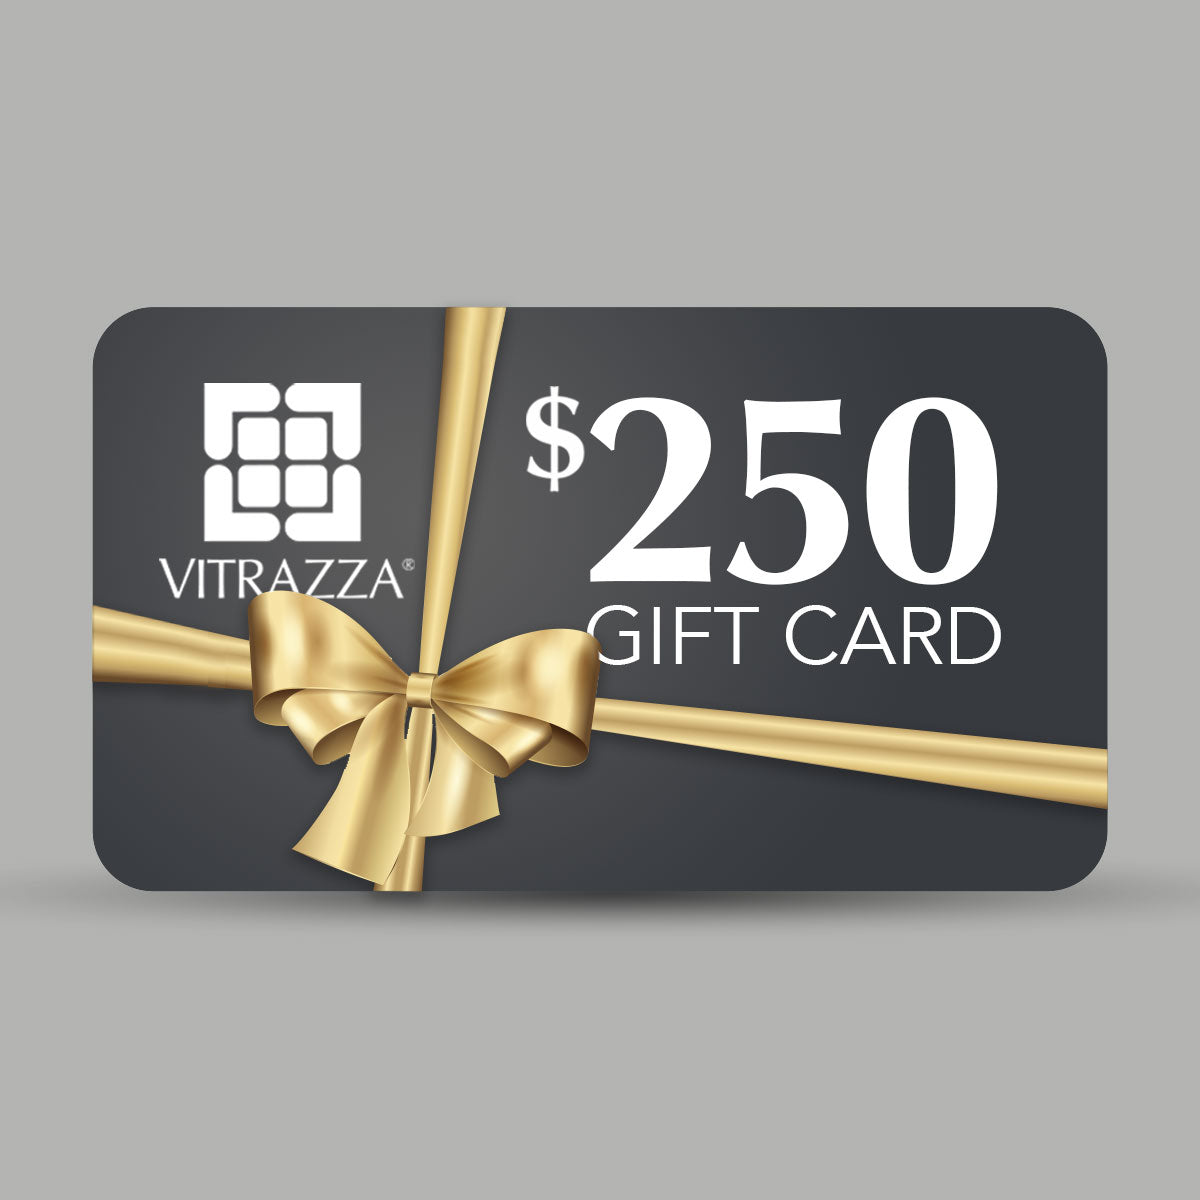 variant_title: Gift Card | Size: $250.00 USD :: alt_text: